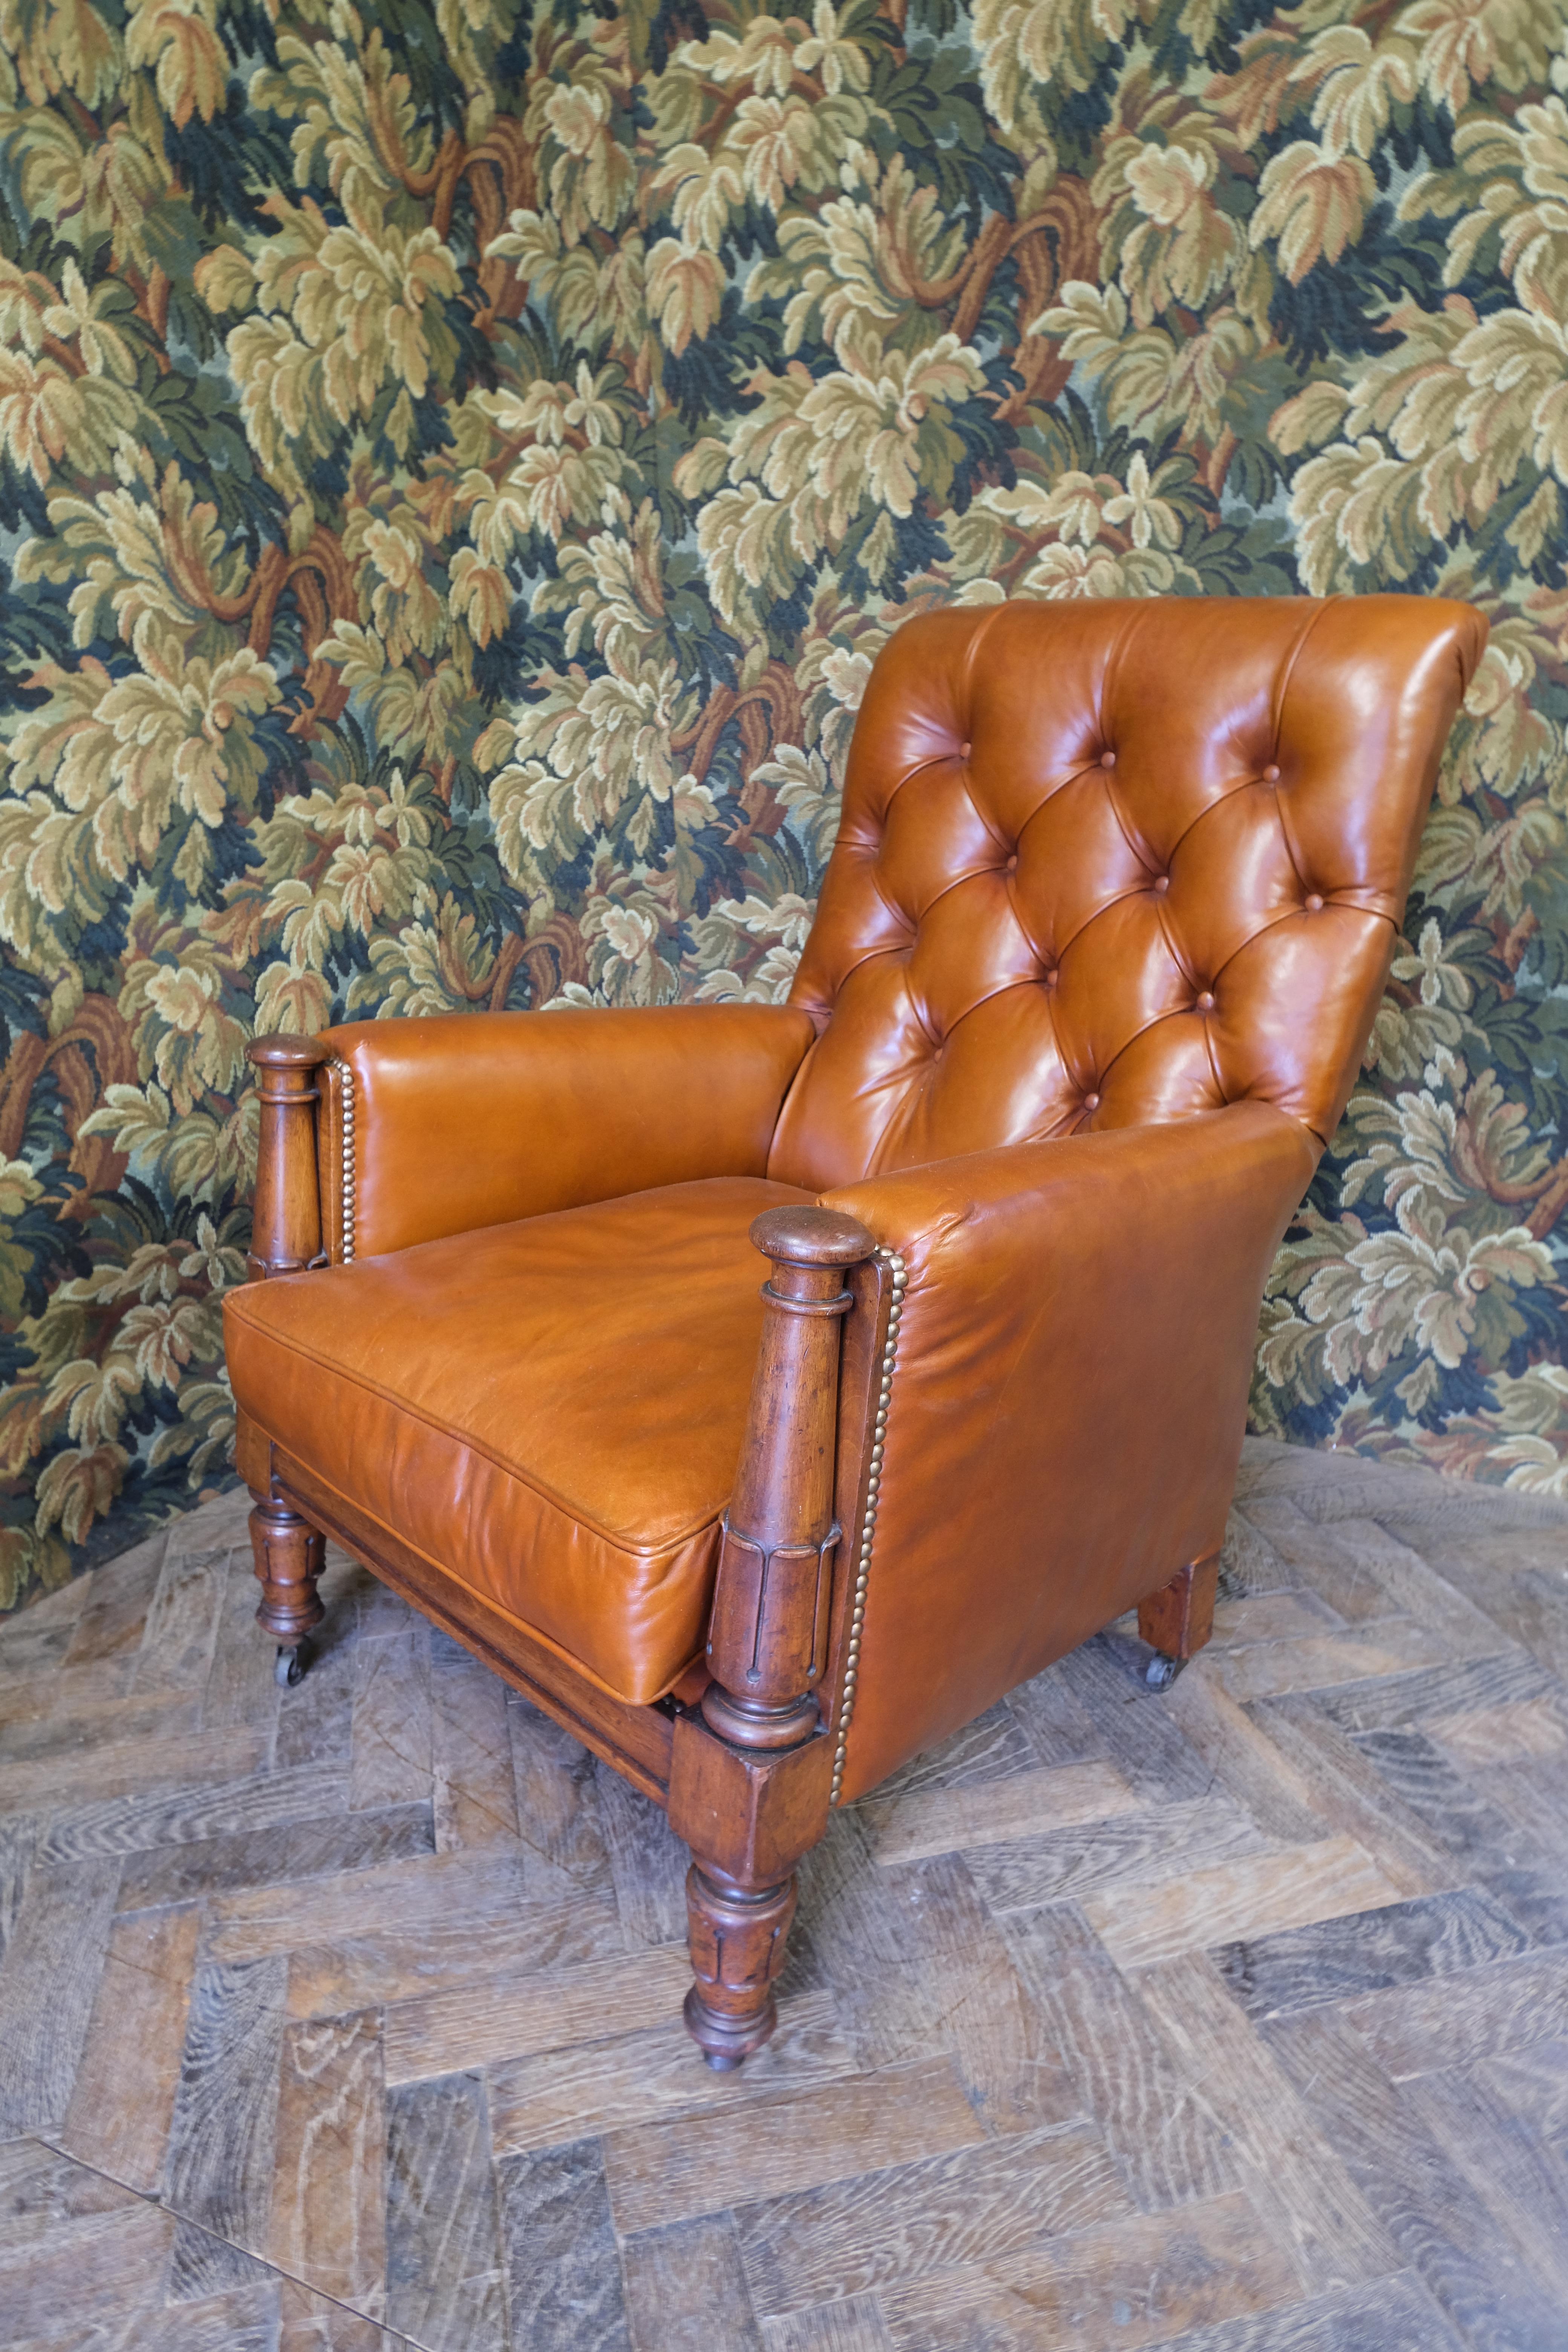 Hutton-Clarke Antiques proudly presents a gem from the early 19th century: our William IV/Early Regency Mahogany English Library Chair. Reupholstered in luxurious chestnut brown leather, this chair epitomizes the fusion of durability with timeless